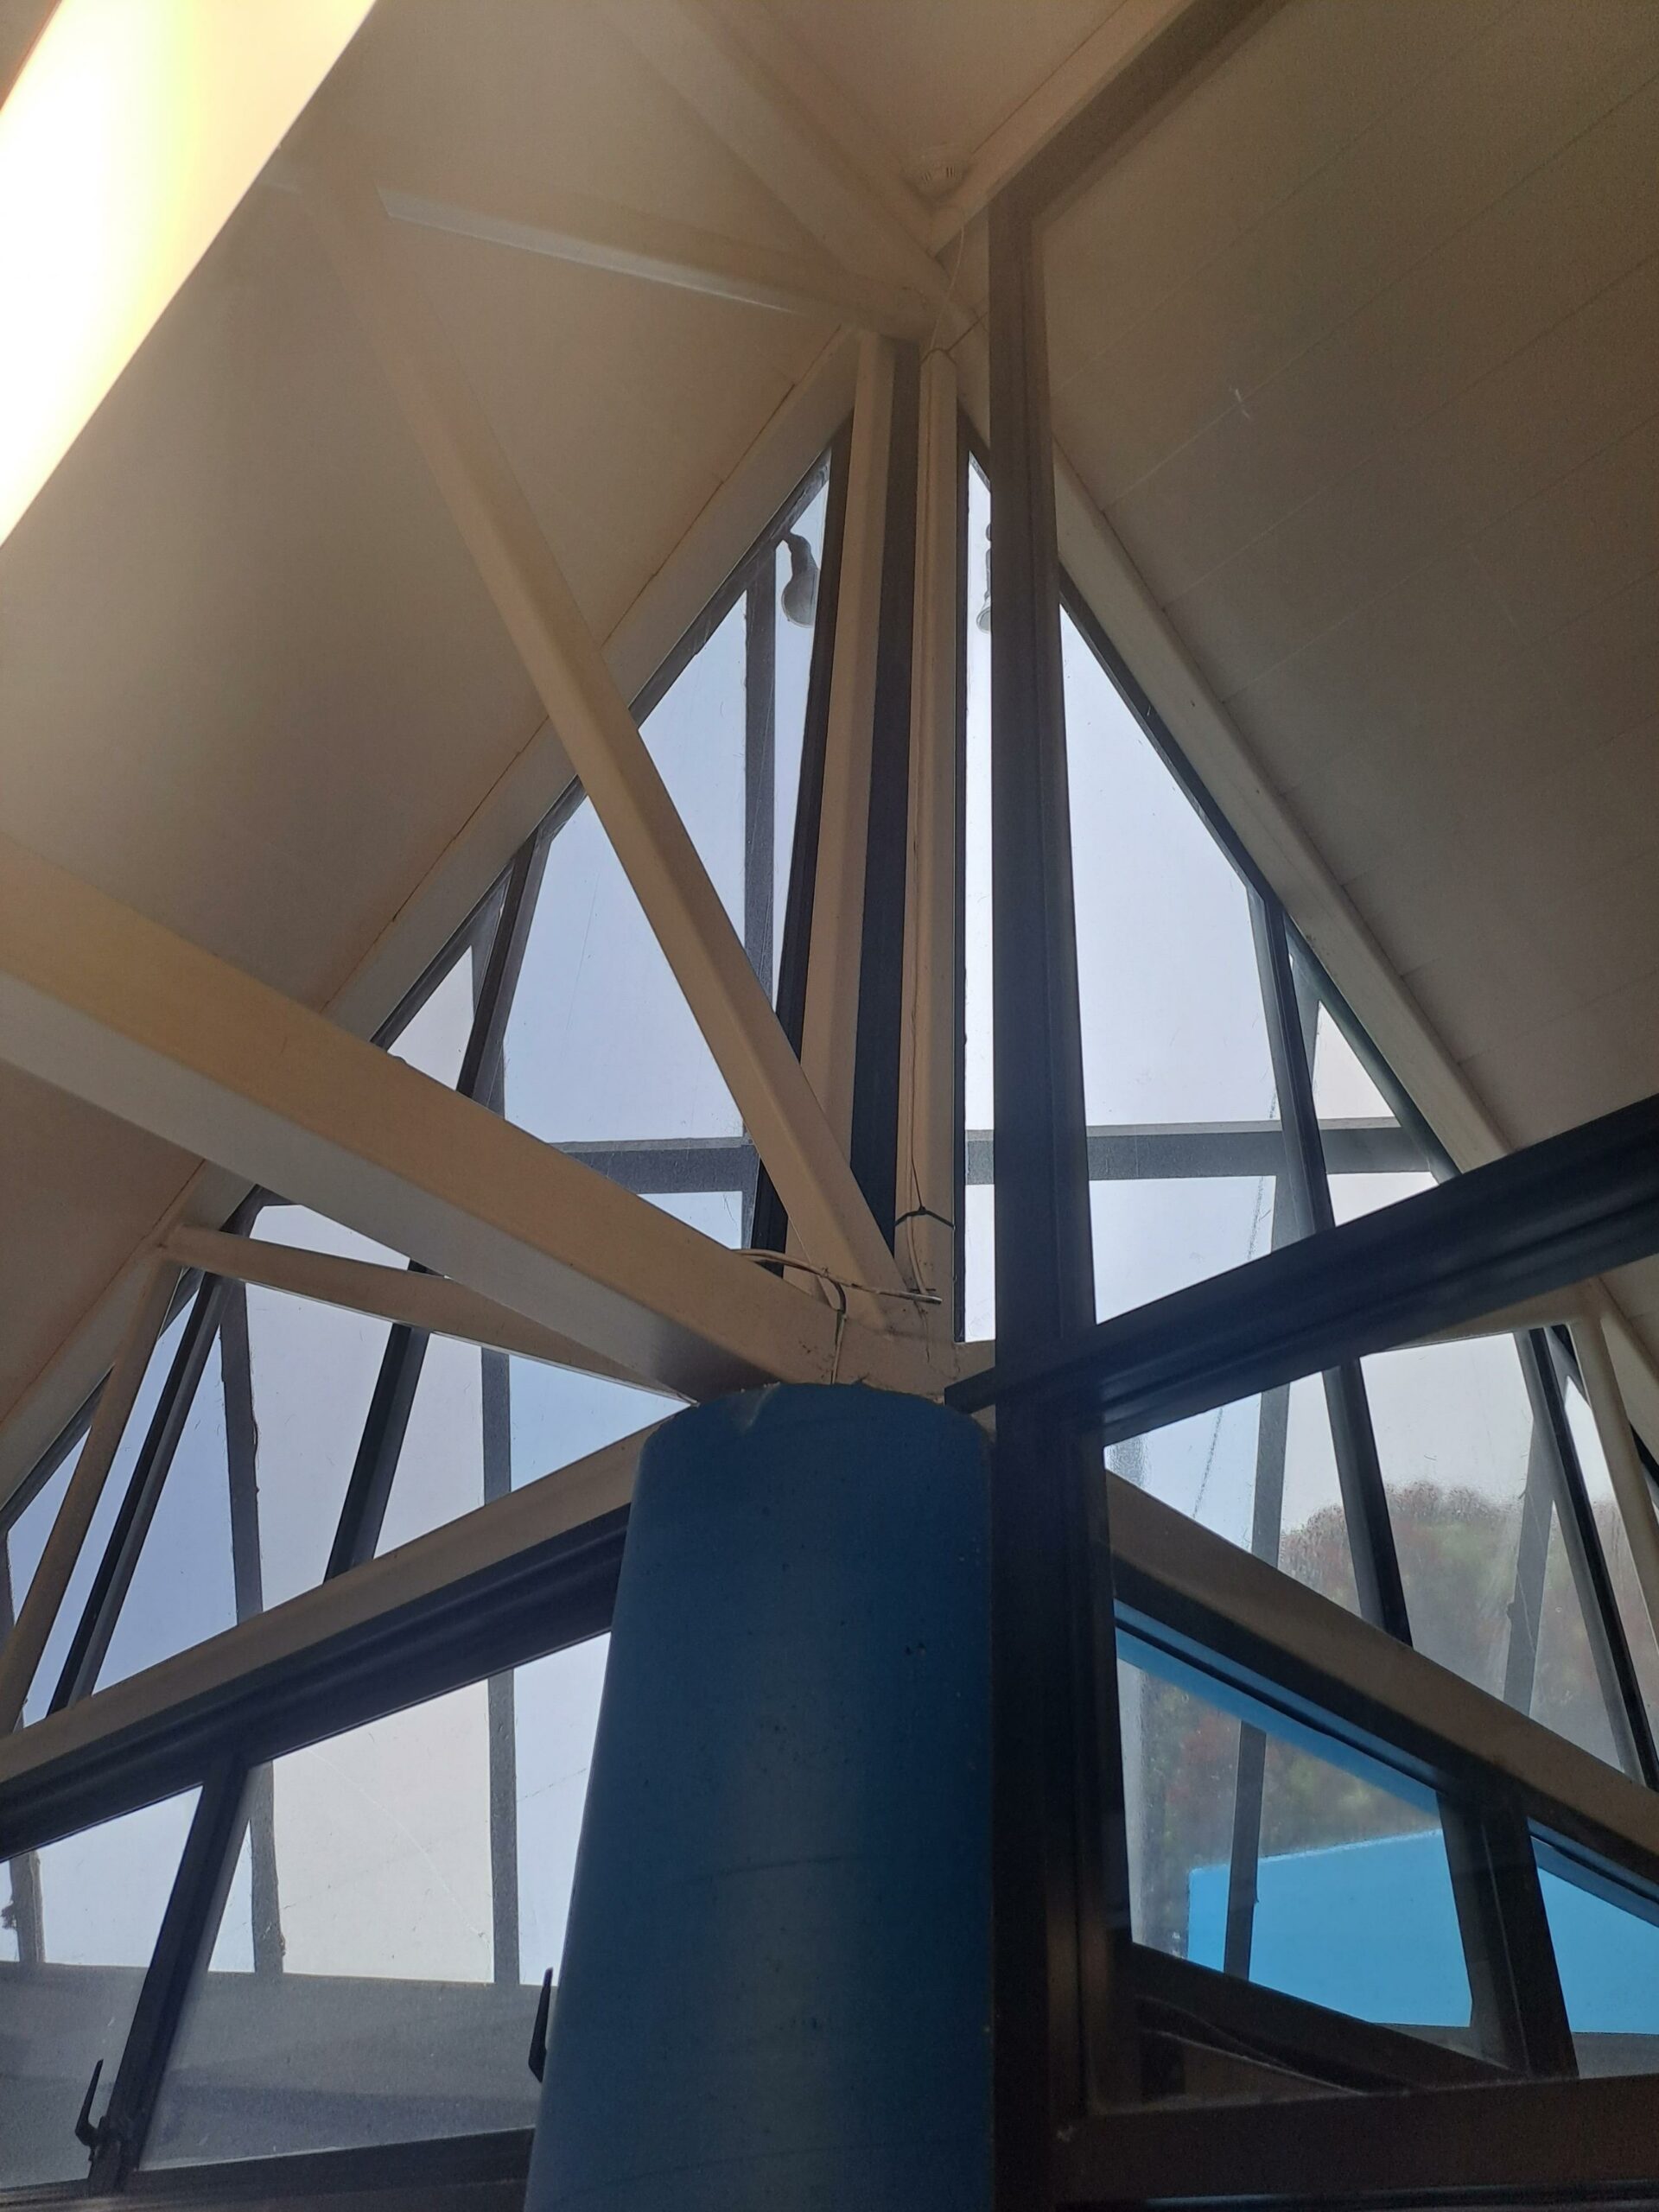 A blue pillar with outreaching metal struts atop it, in front of a corner window.